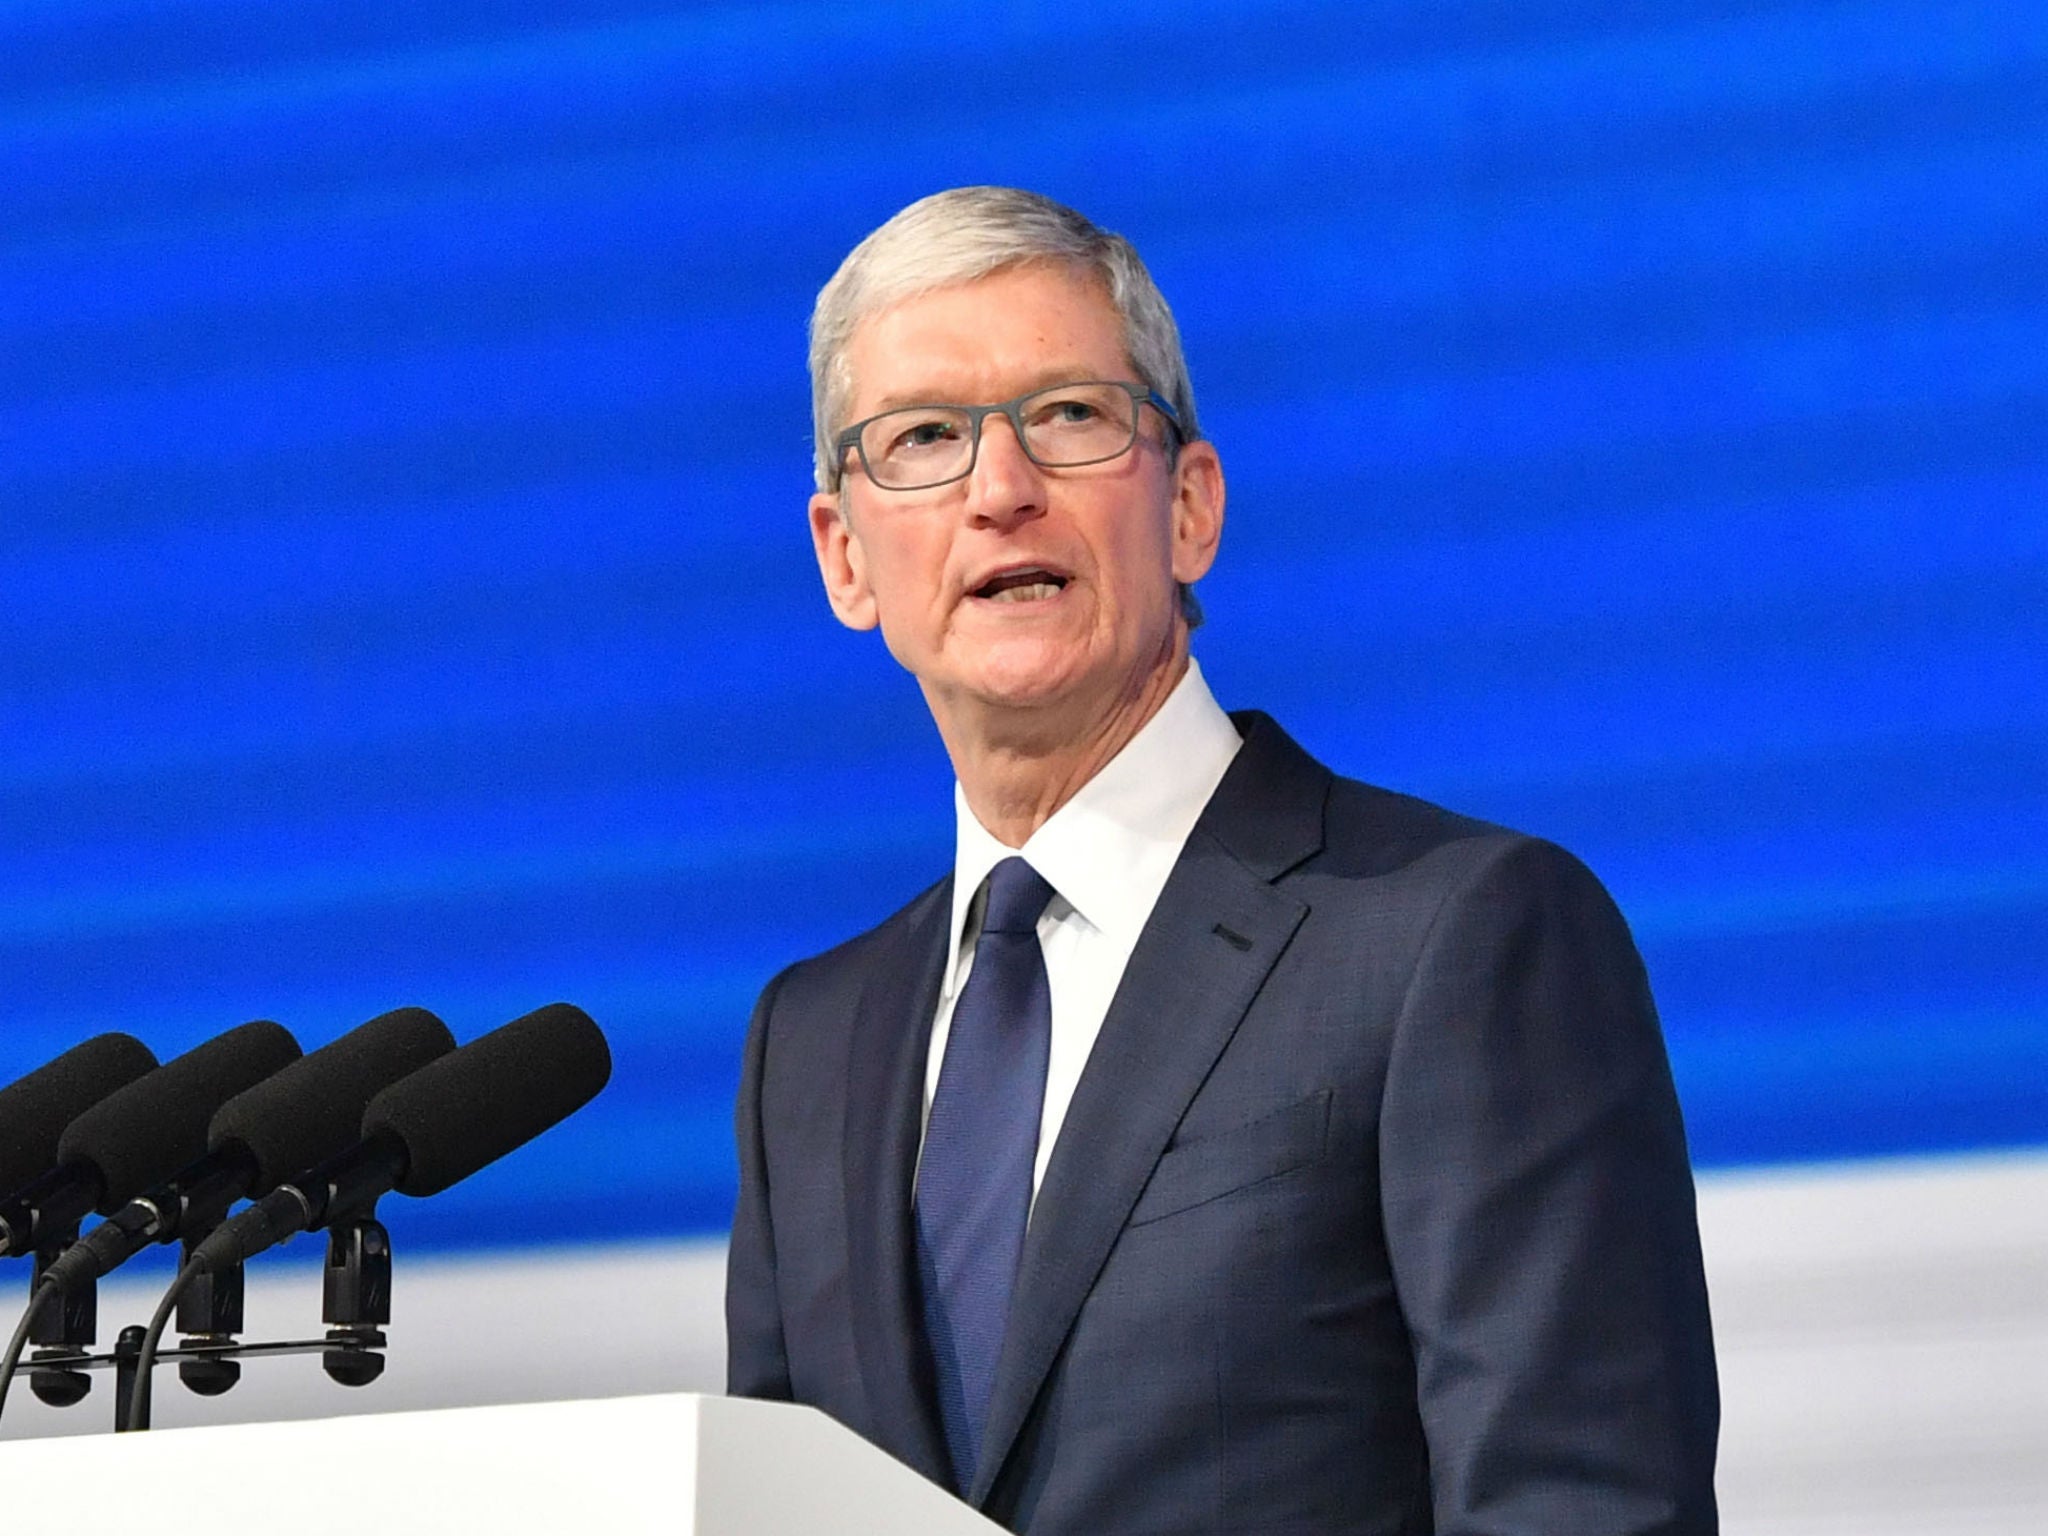 Apple CEO Tim Cook suggested he would not have repeated Mark Zuckerberg's mistakes